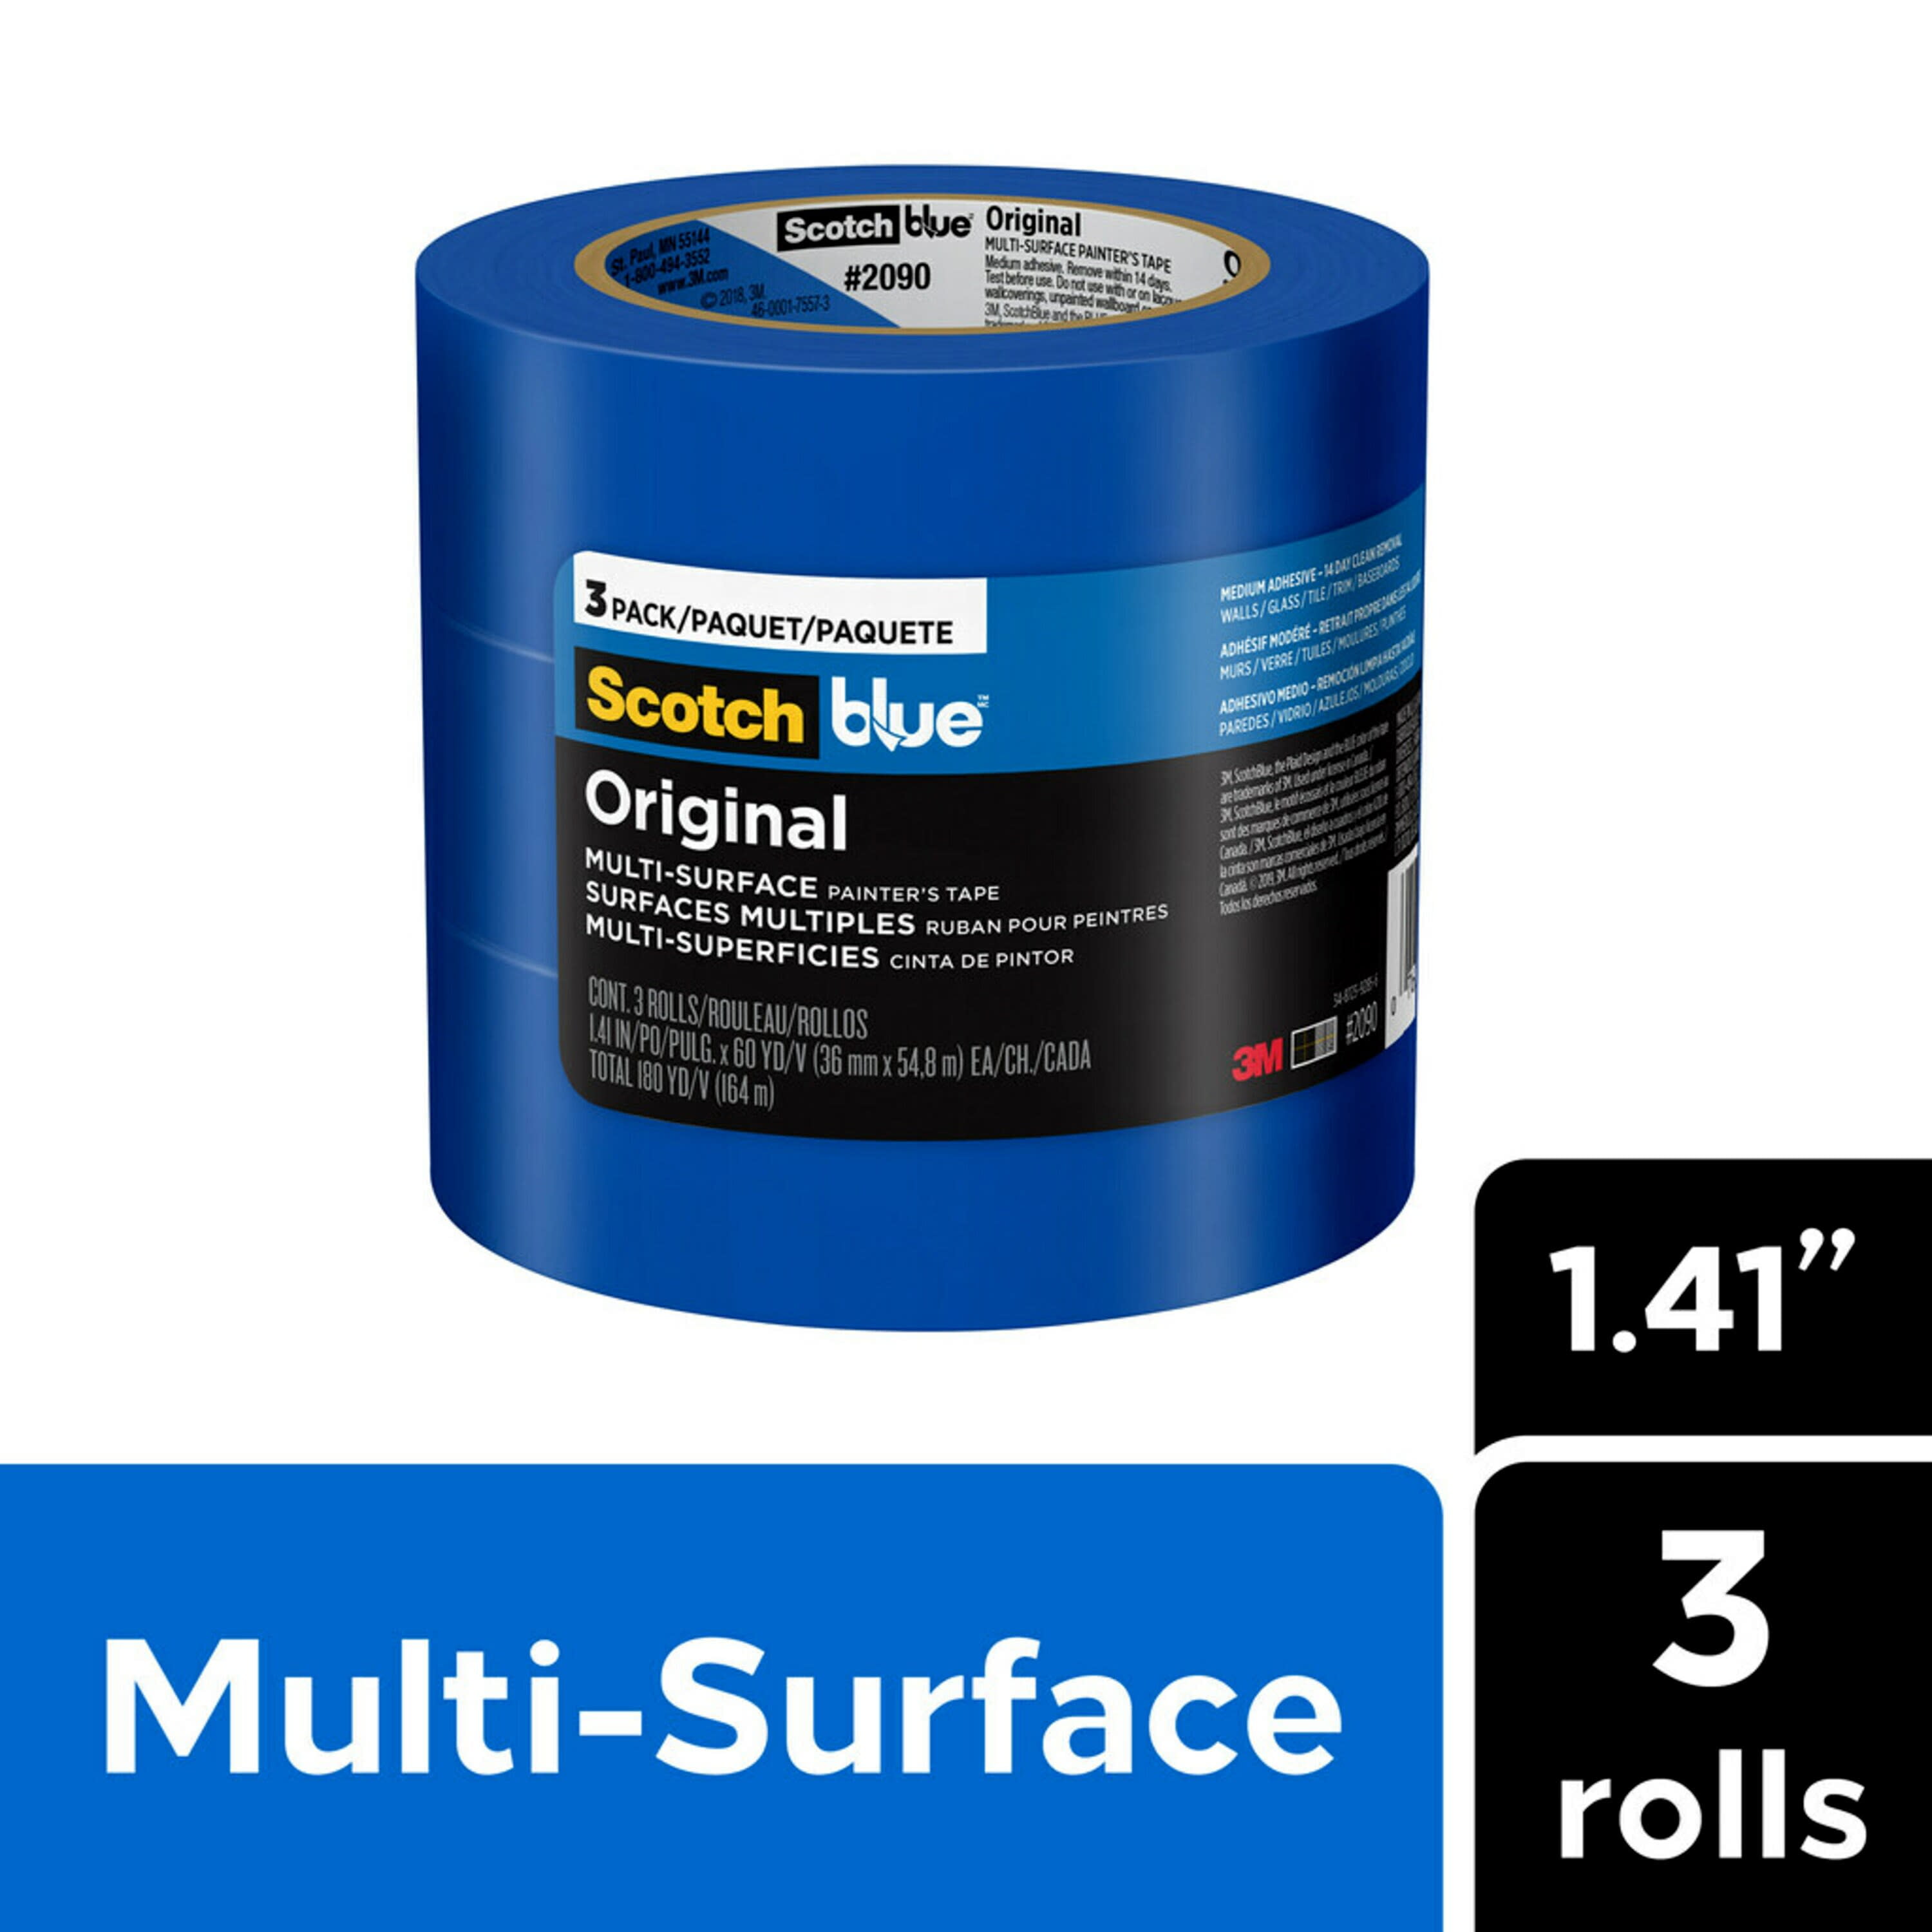 Blue Painters Tape 1 inch x 60 Yards - Case of 48 Rolls, Made in USA, Clean  Removal Blue Tape for Painting Sharp Lines & Edges, UV Resistant Blue